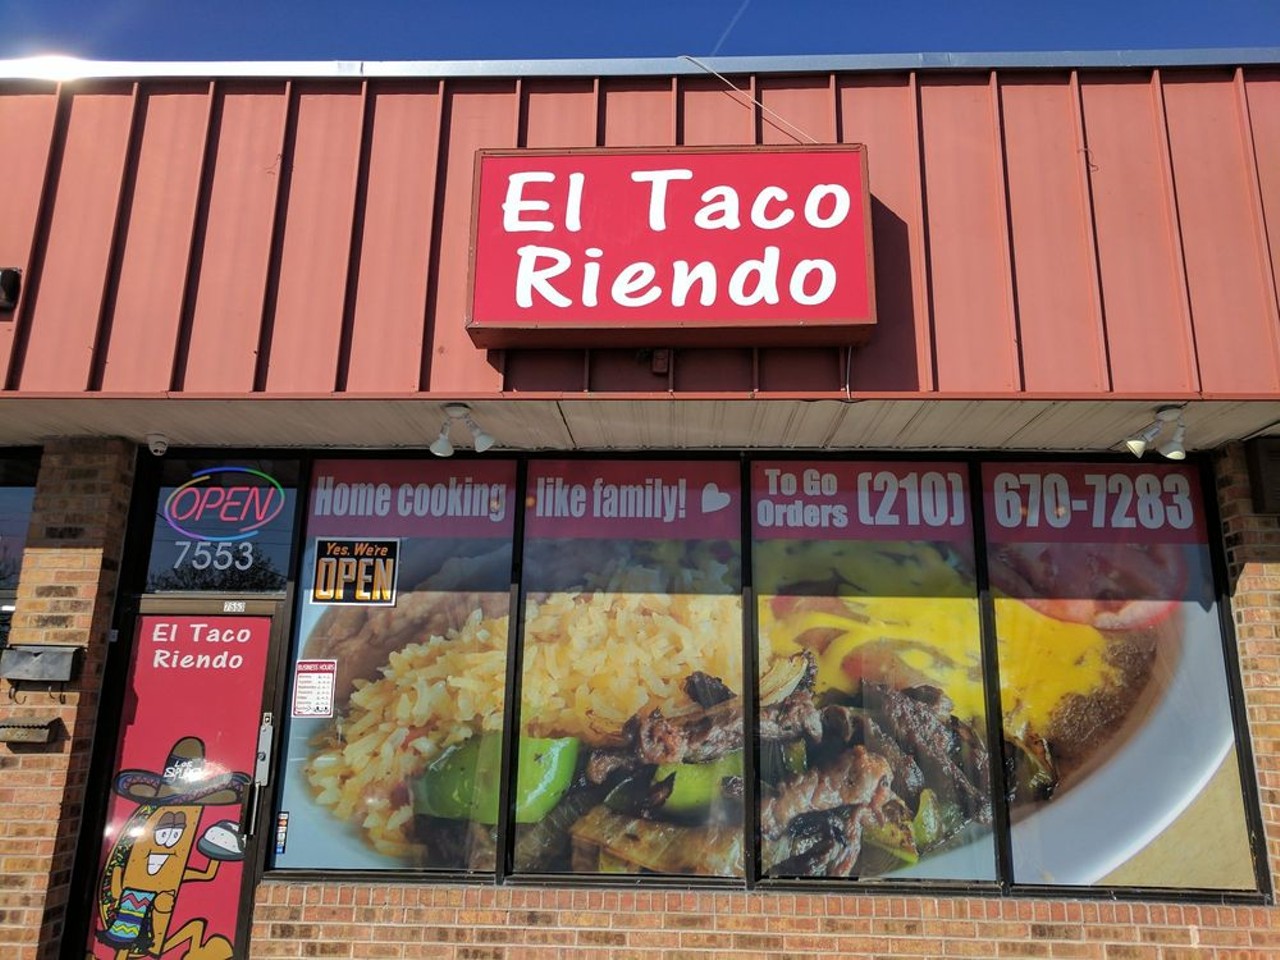 El Taco Riendo
7553 McCullough Ave, (210) 670-7283, facebook.com
Everyone knows that some of the best restaurants are found in strip malls. El Taco Riendo definitely fits the bill. Inside this shopping center outpost you’ll be able to dine in for breakfast or lunch. During the latter, fideo loco is up for grabs. Do yourself a favor and order a bowl of the puro delicacy.
Photo via Yelp / Shawn G.